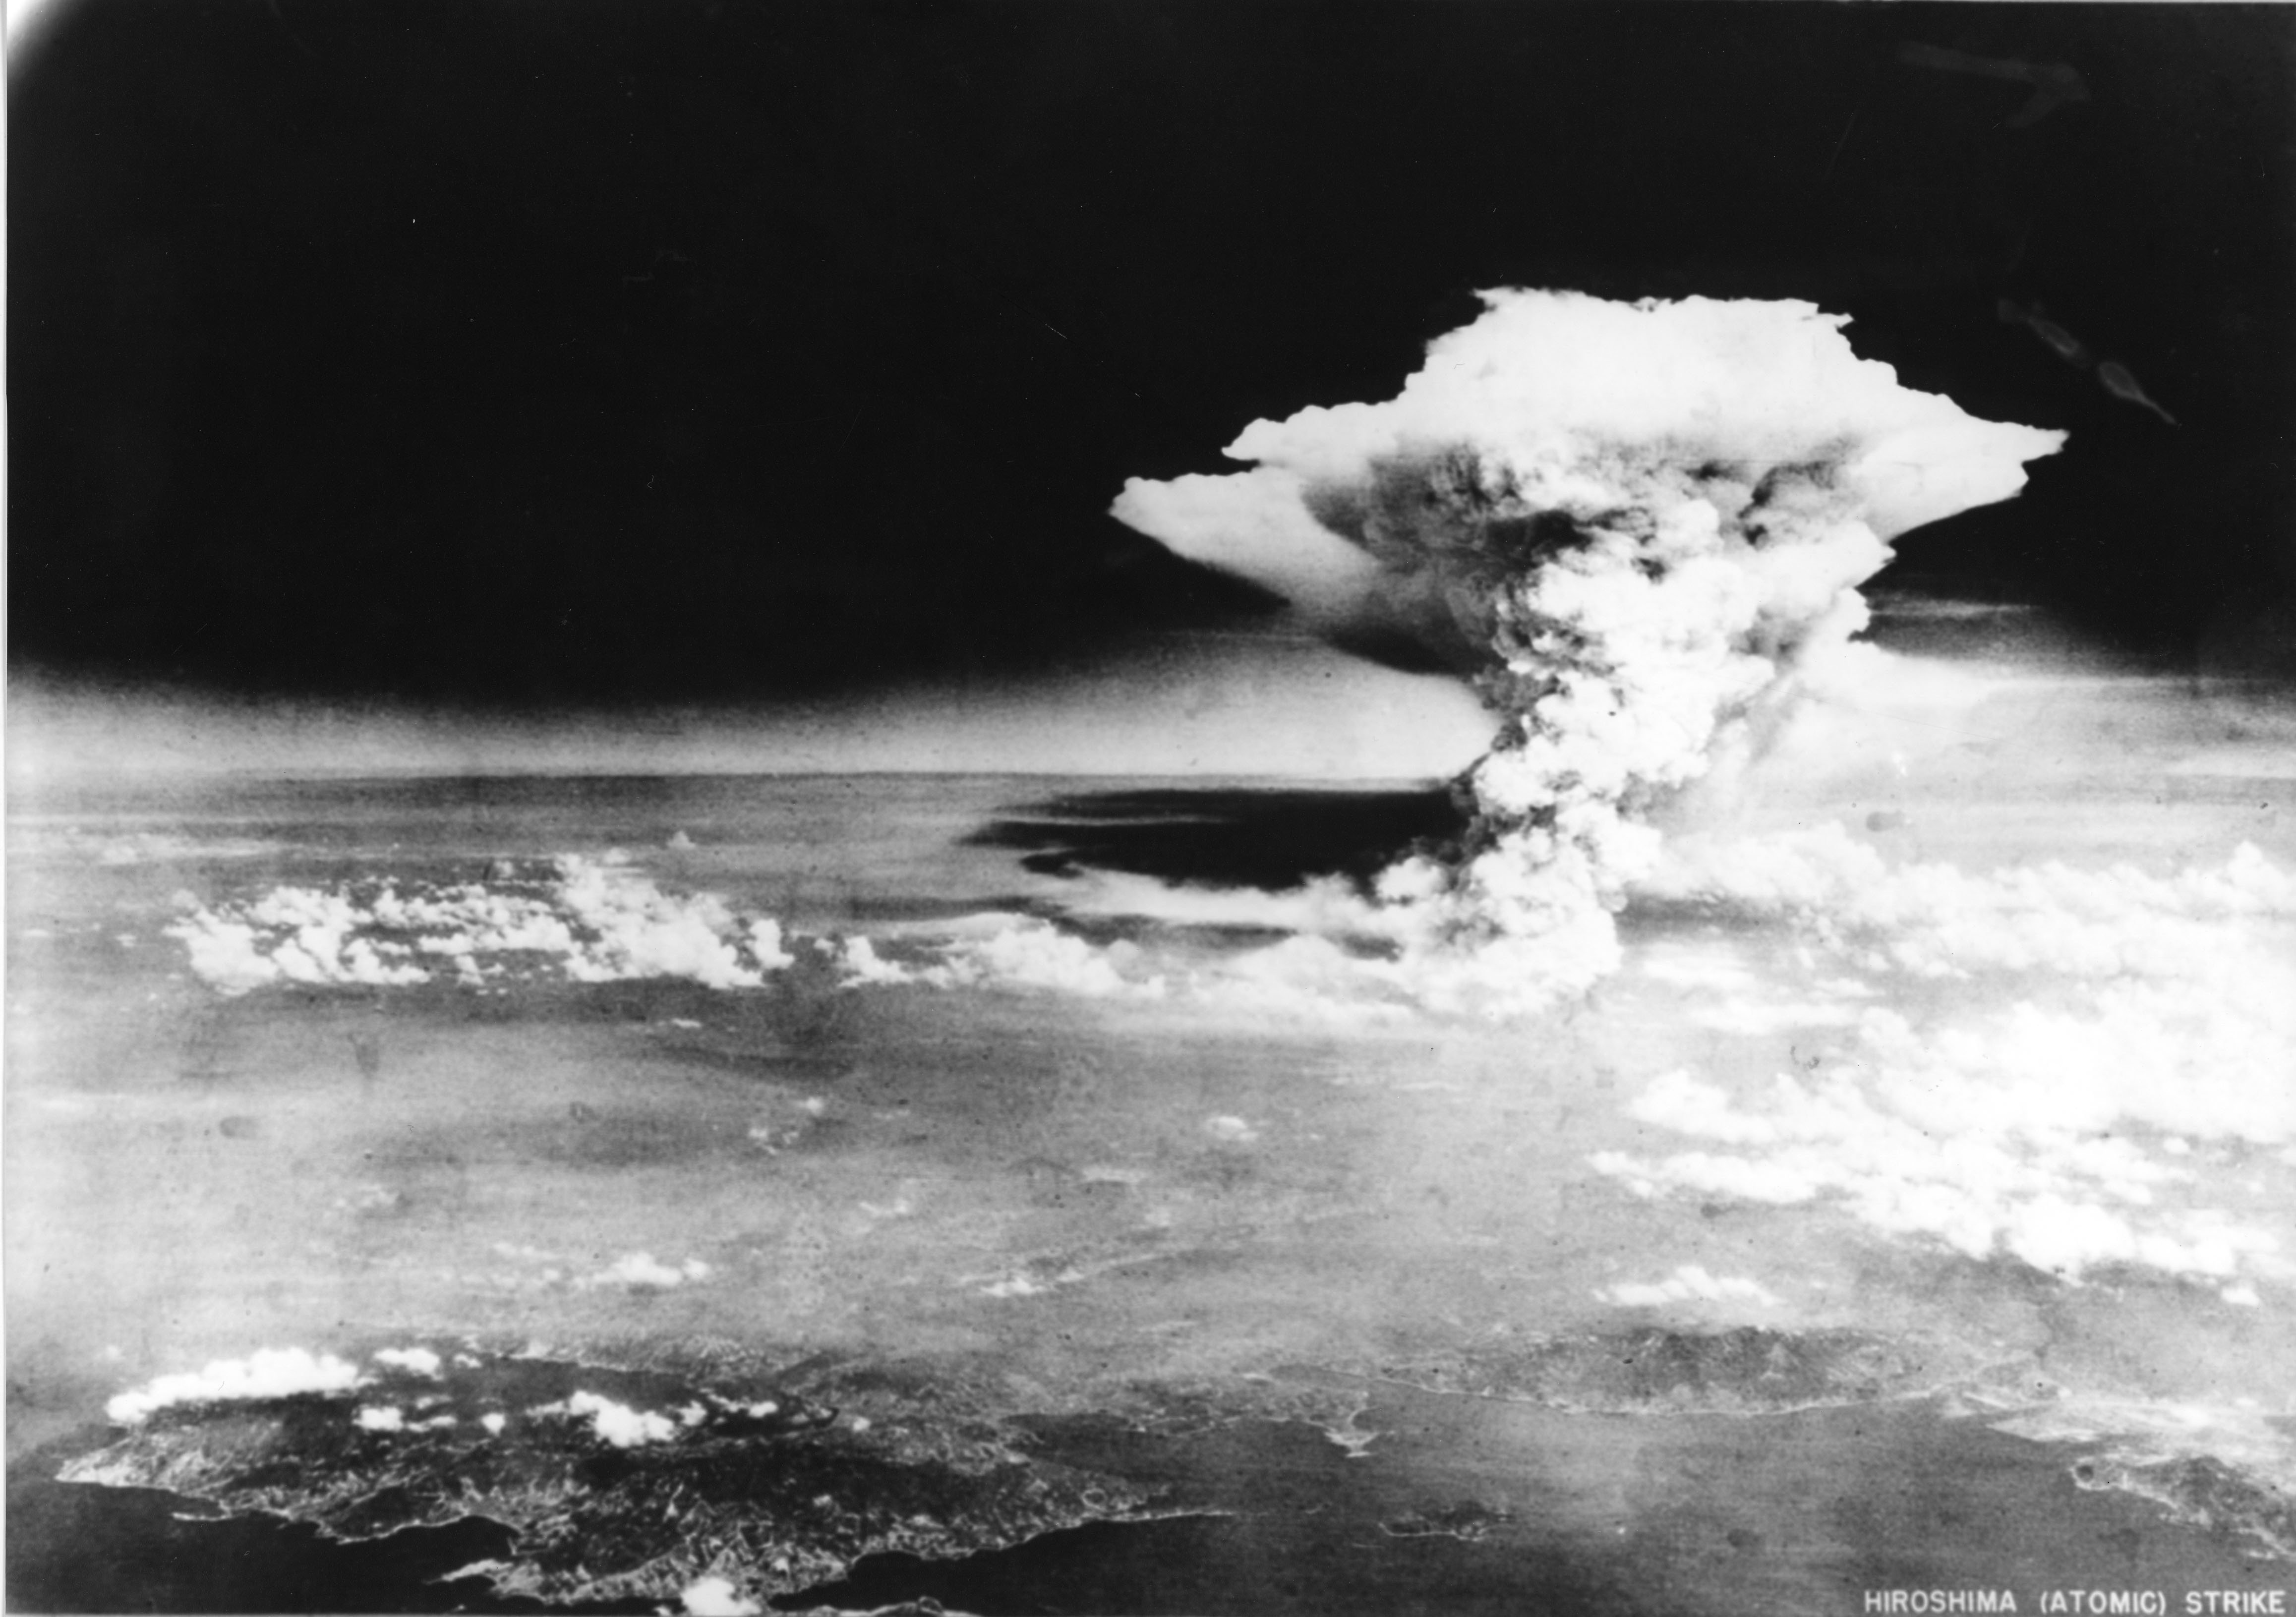 This handout picture, taken on August 6, 1945 by the US Army and released by the Hiroshima Peace Memorial Museum, shows the mushroom cloud of the atomic bomb dropped over the city of Hiroshima. About 140,000 people are estimated to have been killed in the attack, including those who survived the bombing itself but died soon afterward due to severe radiation exposure. Photo: AFP / Hiroshima Peace Memorial